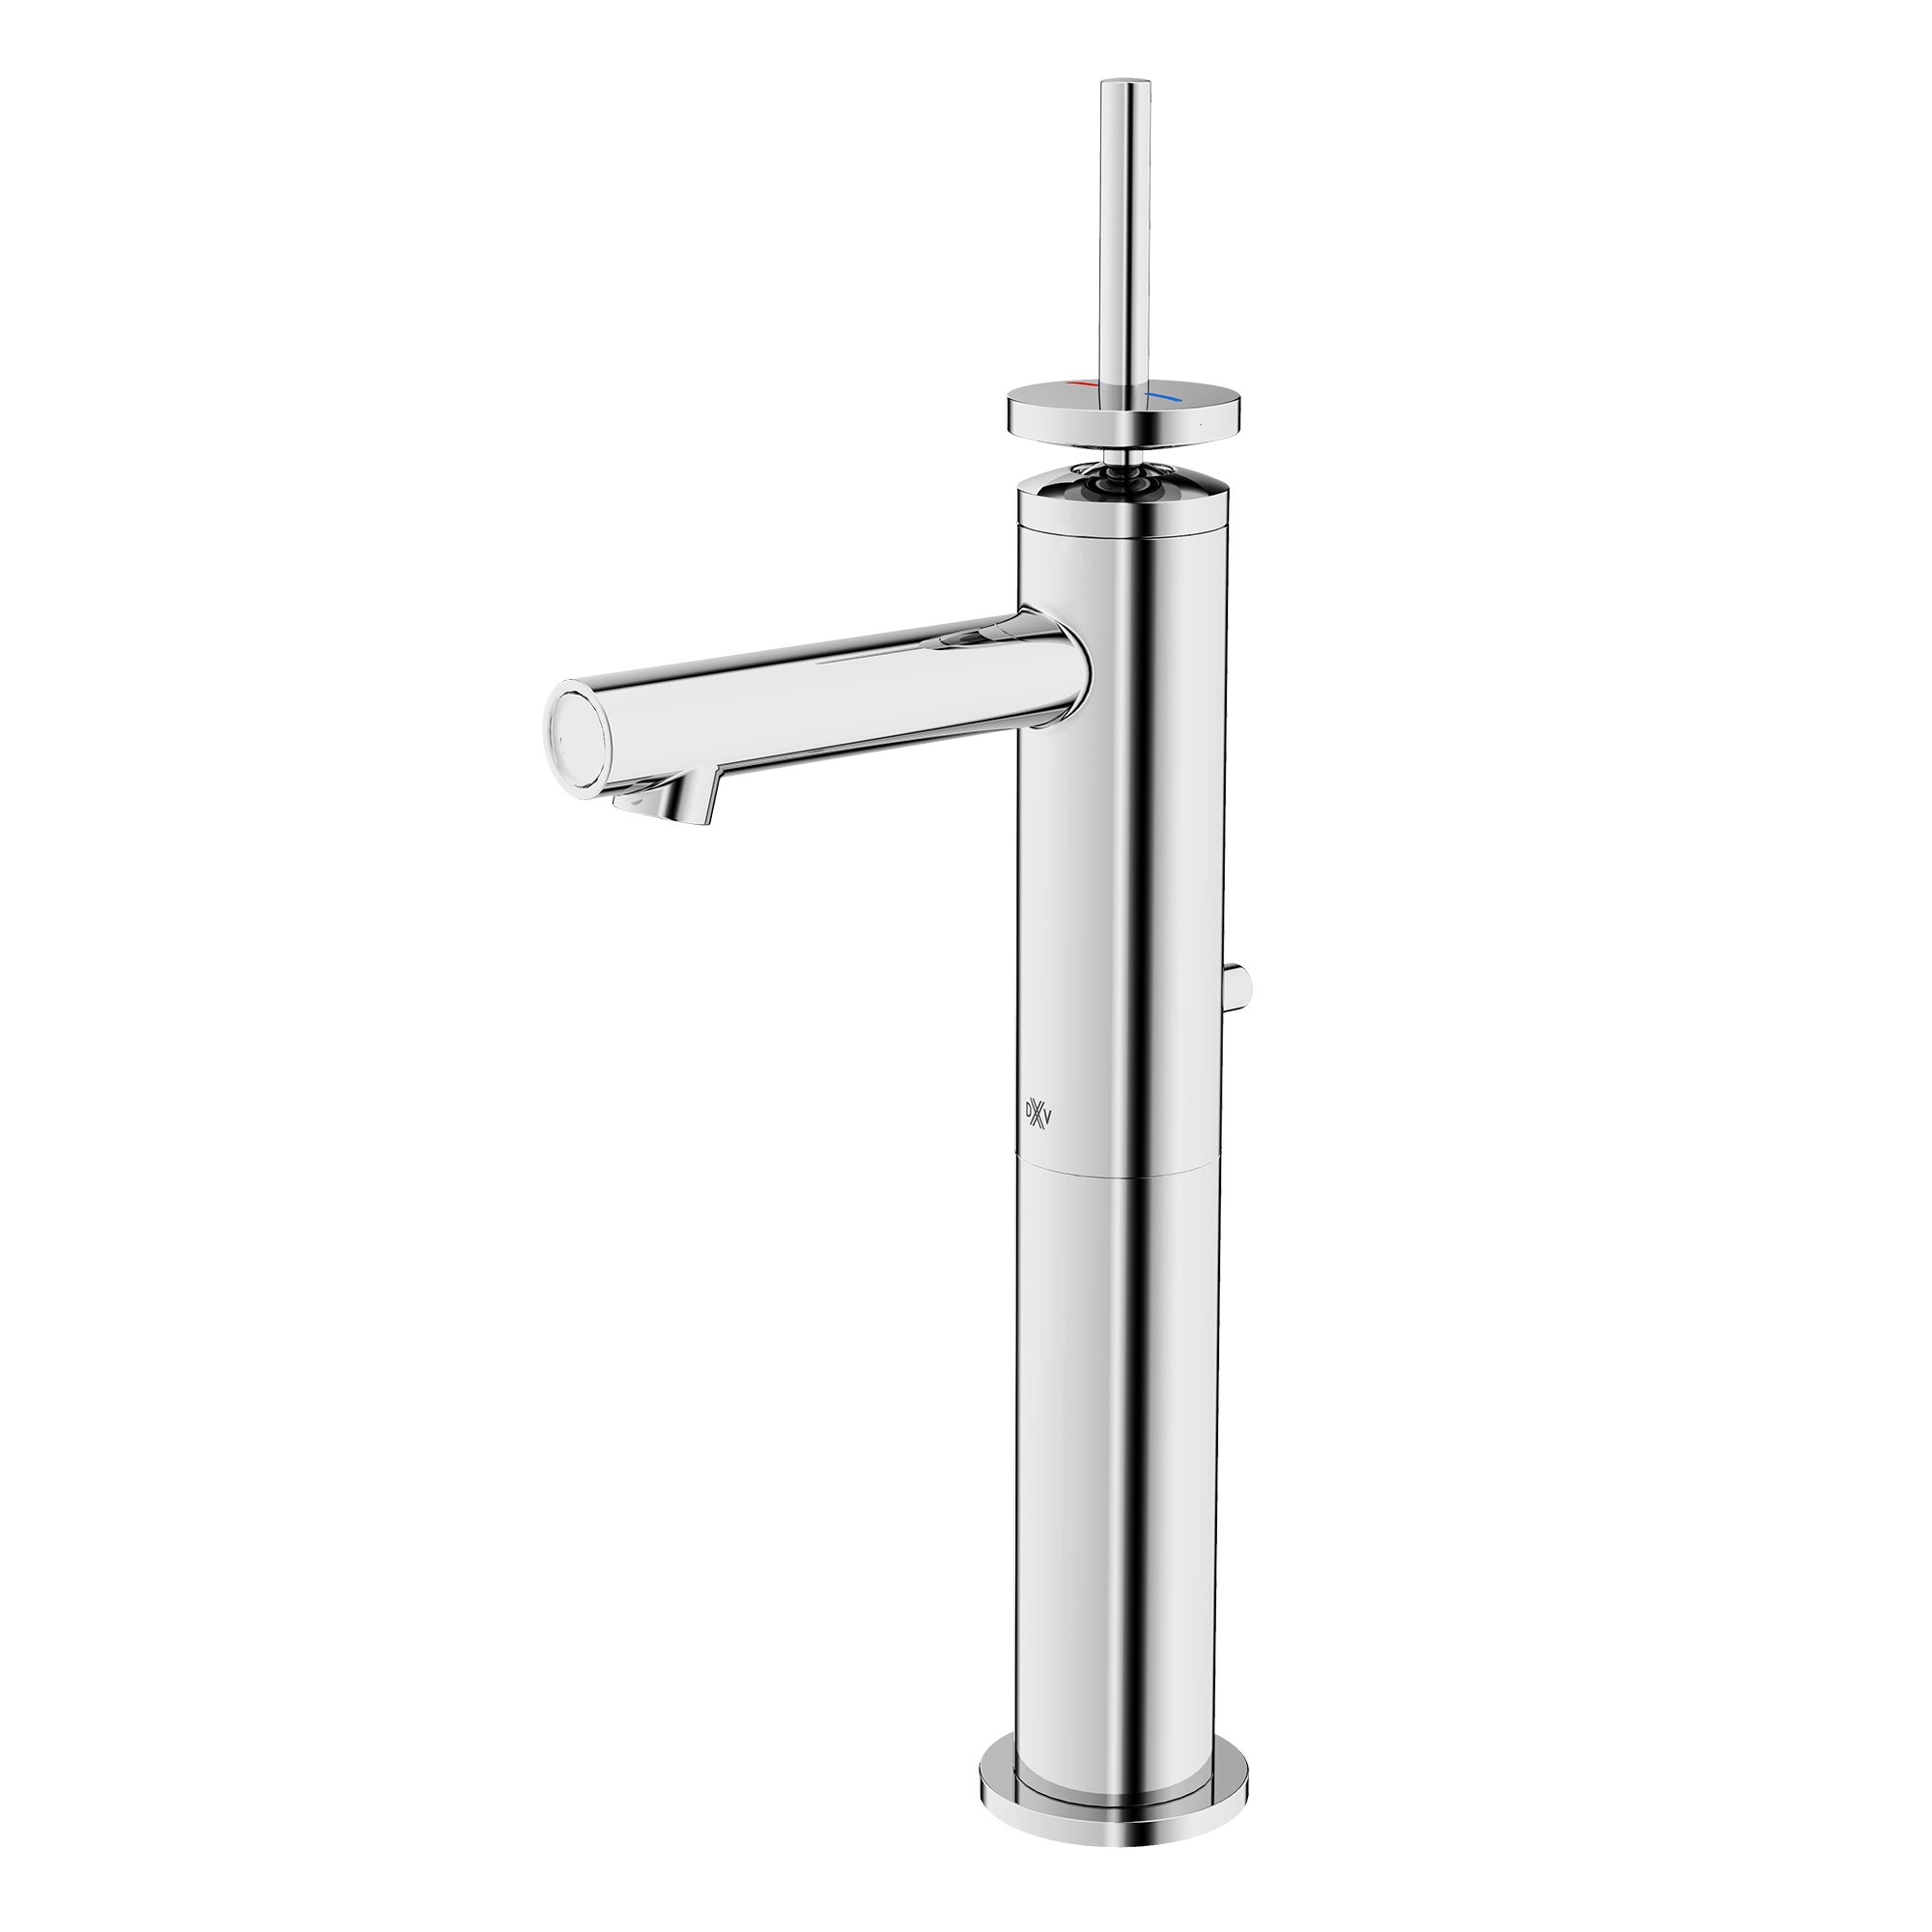 Percy® Single Handle Vessel Bathroom Faucet with Indicator Markings and Stem Handle